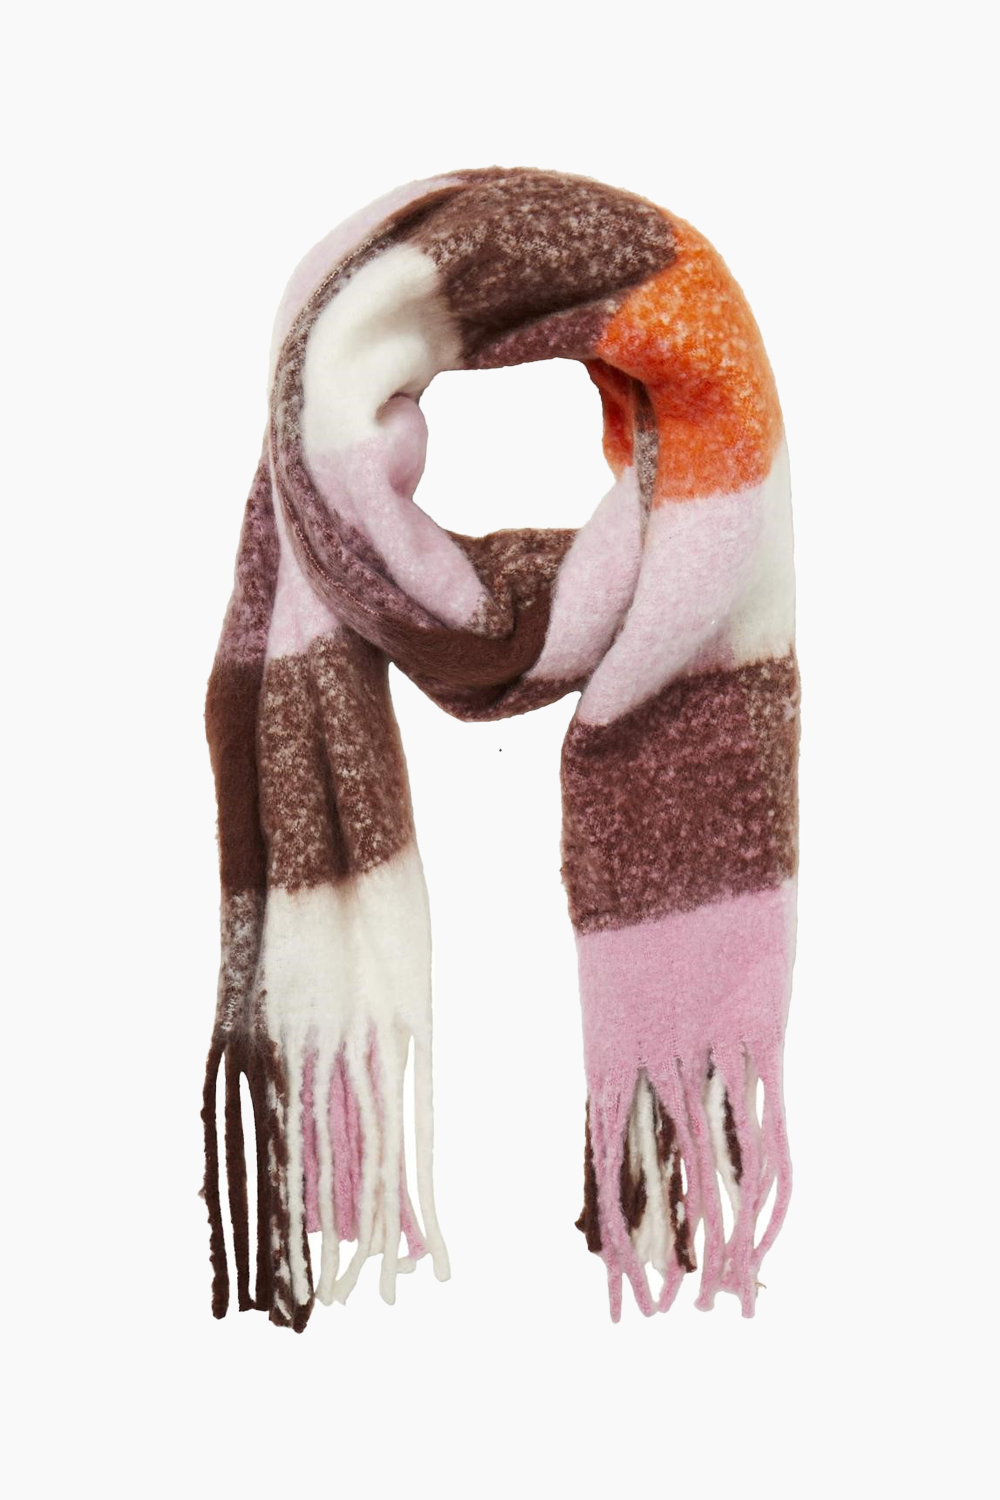 Objmitta Check Scarf Rep - Bitter Chocolat/Orchid - Object